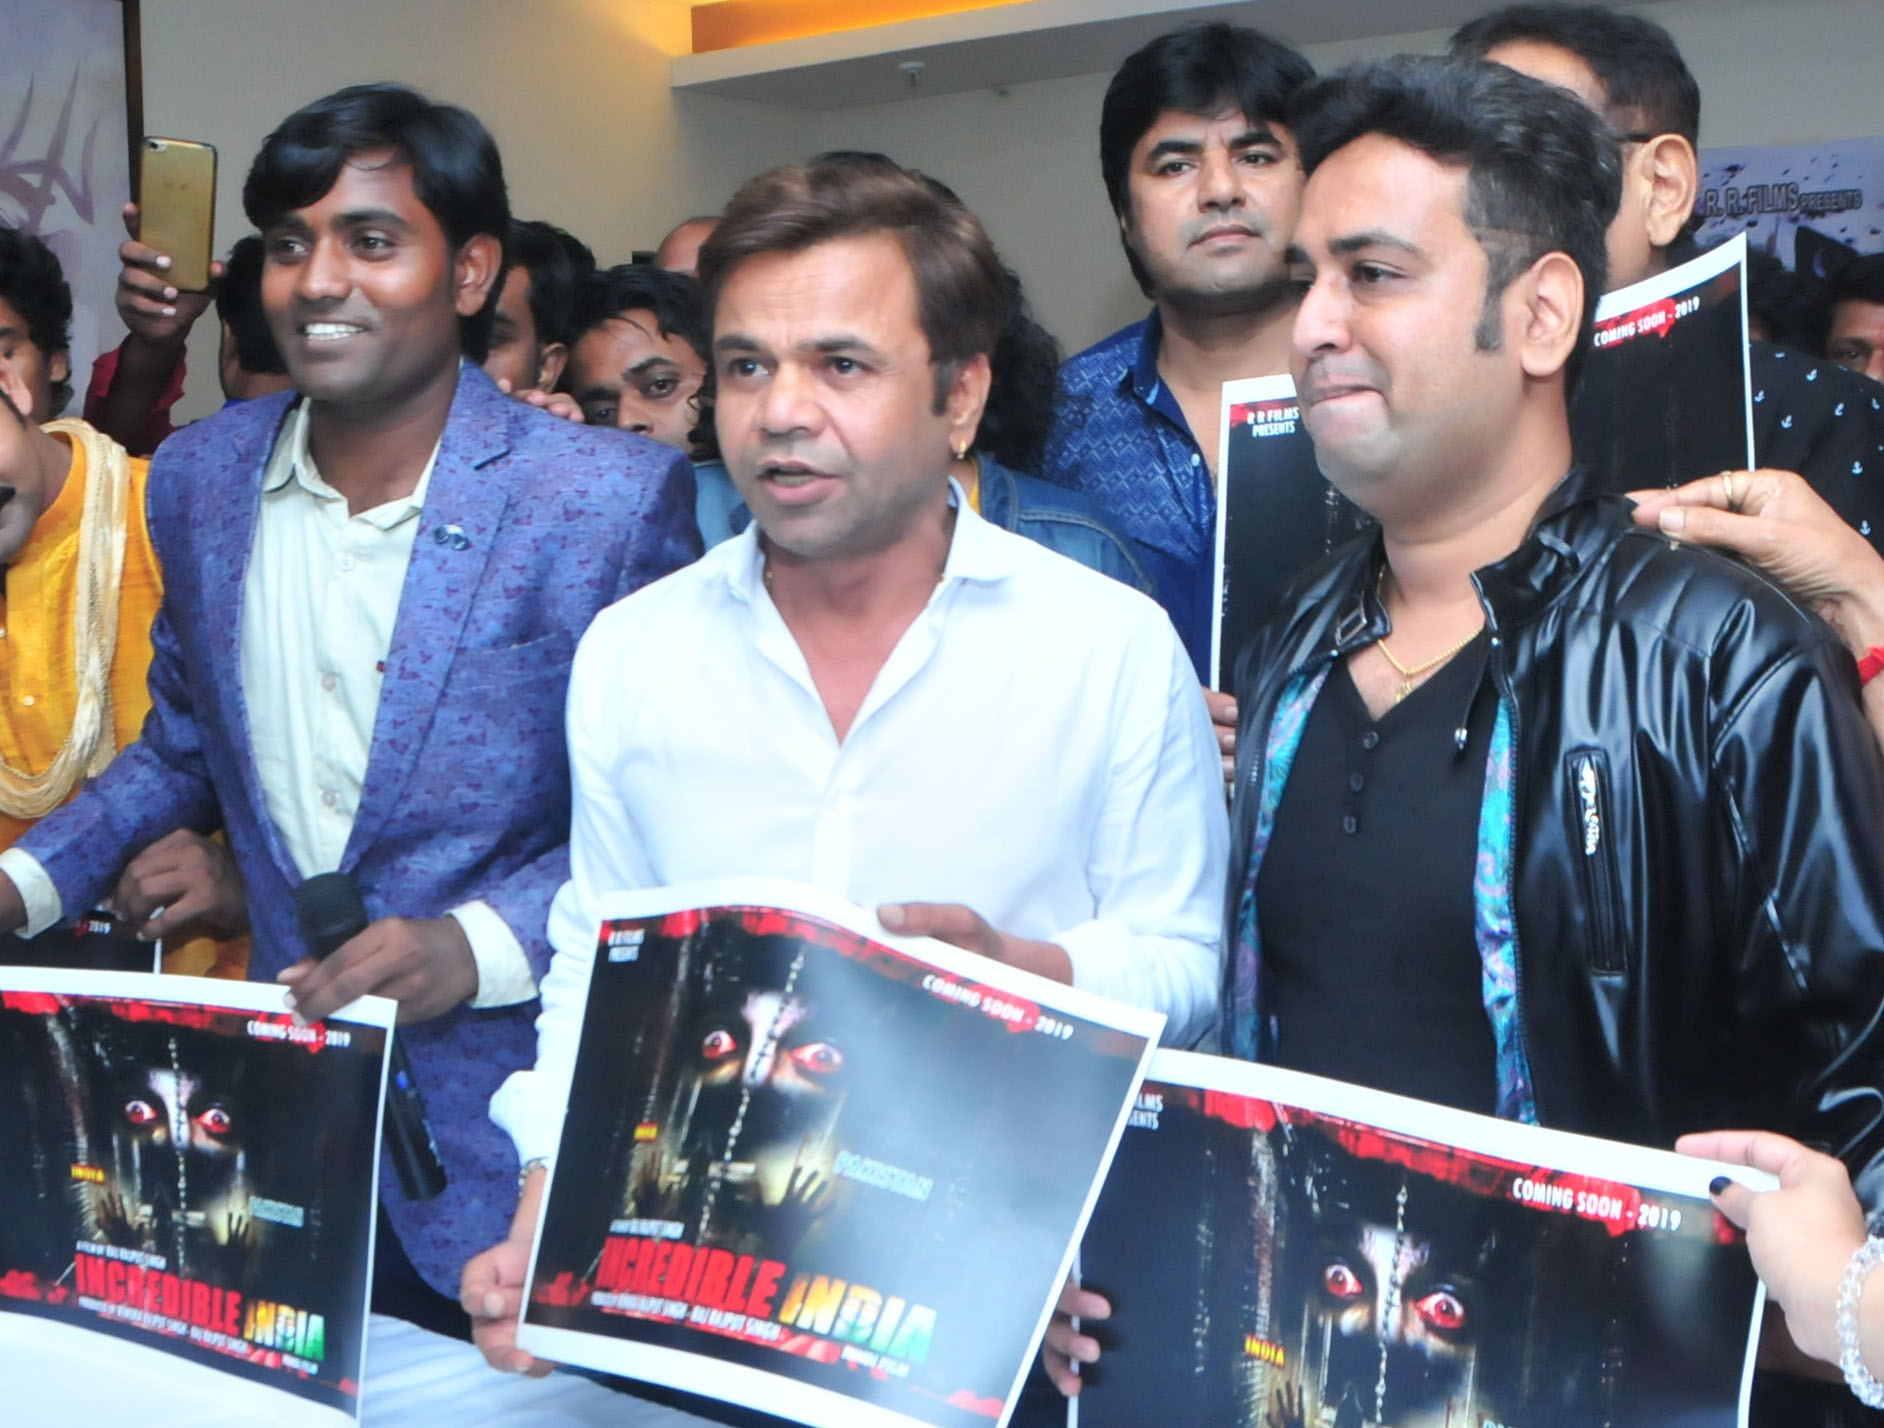 Rajpal Yadav, who came to the poster launch of Incredible India